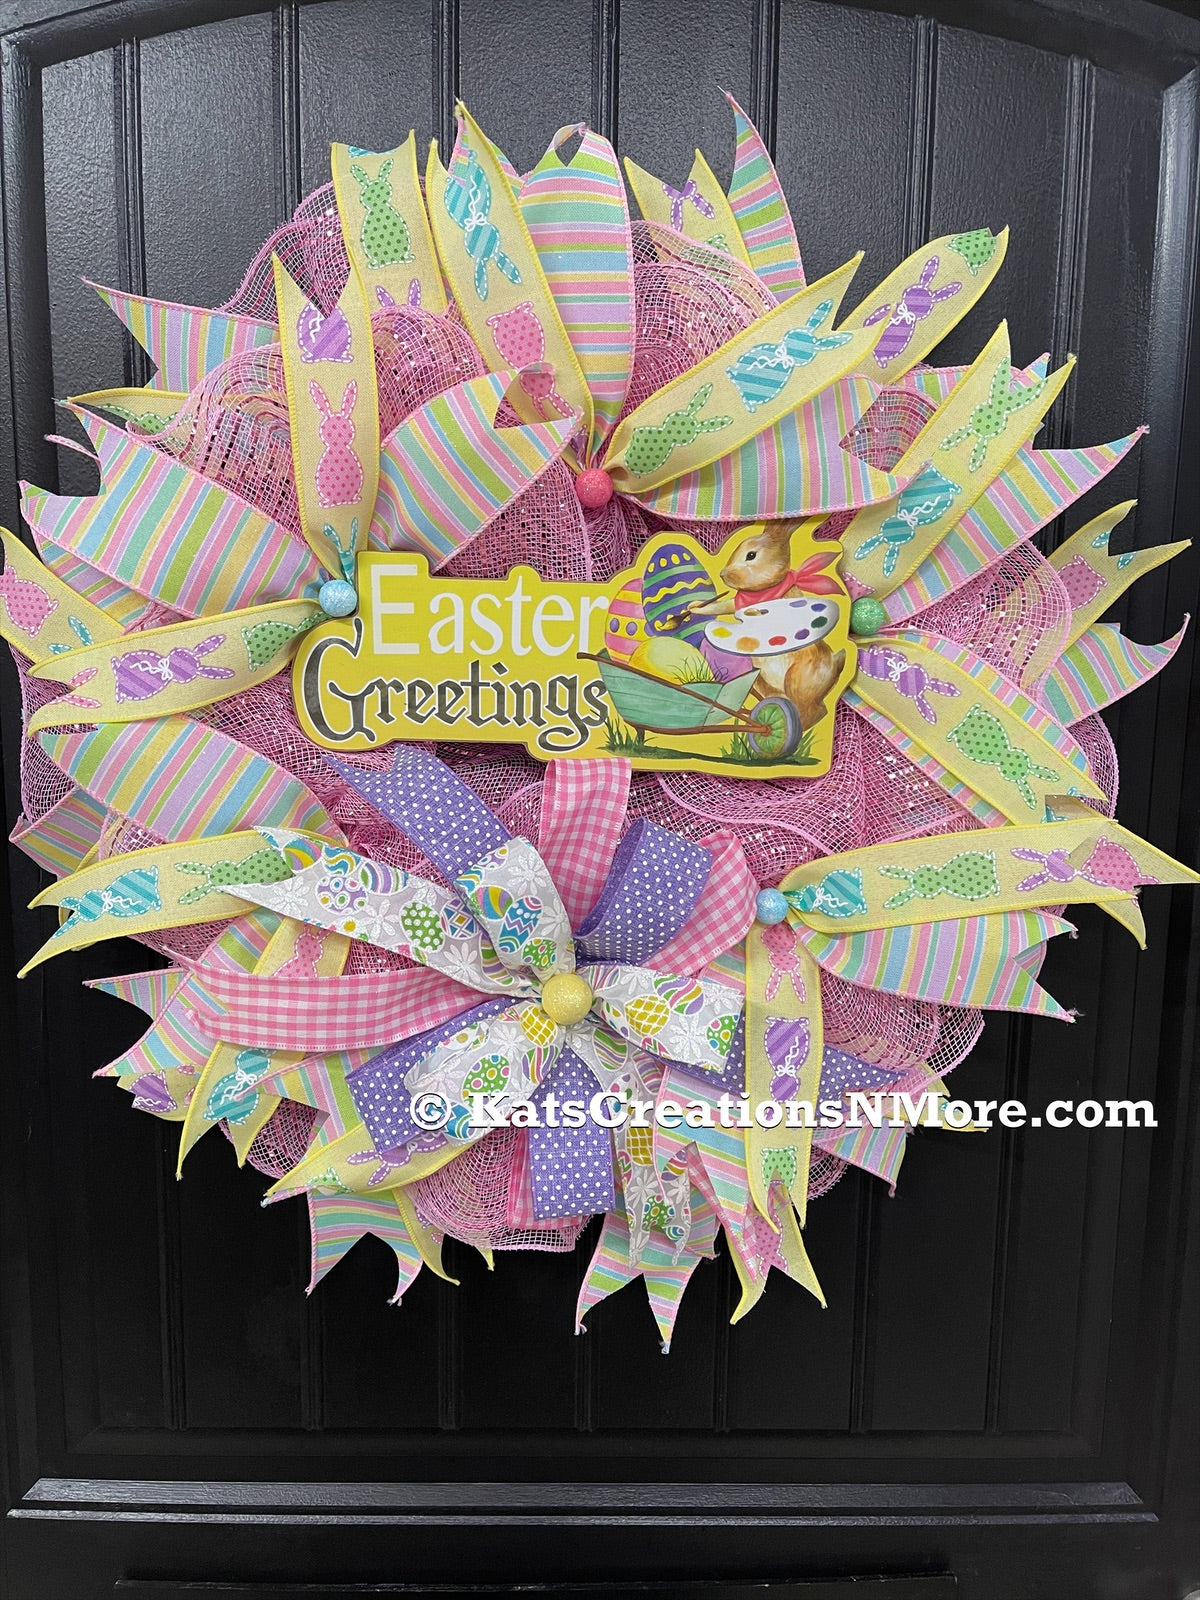 Easter Greetings Bunny Wreath with Pink, Yellow, Blue, Green and Purple Pastel Ribbons and Bows on a Black Door